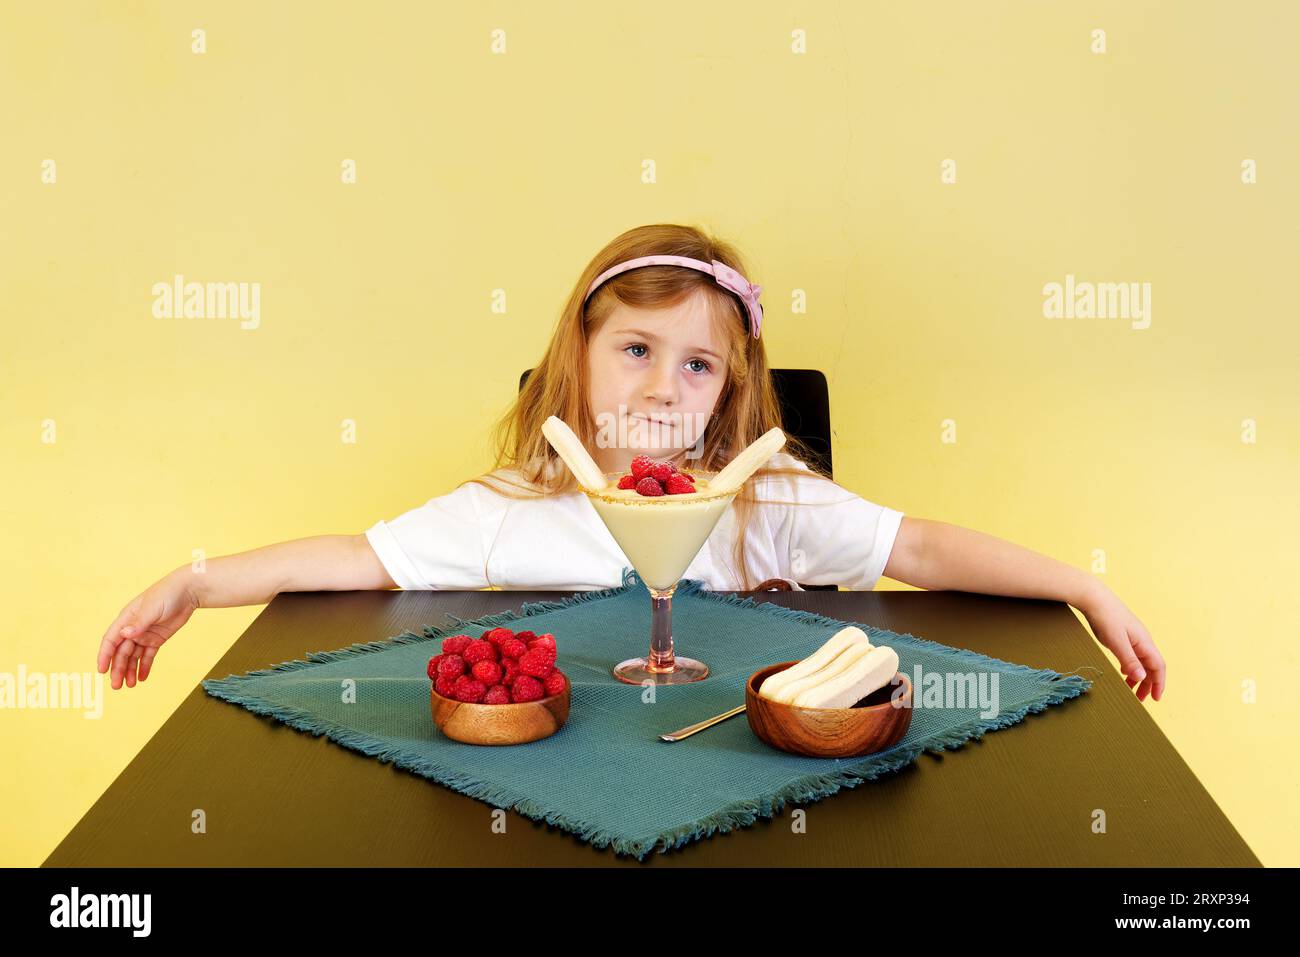 Cute little baby girl looking unhappy, she is not allowed to eat the dessert on the table in front of her. The concept of celebration. Stock Photo